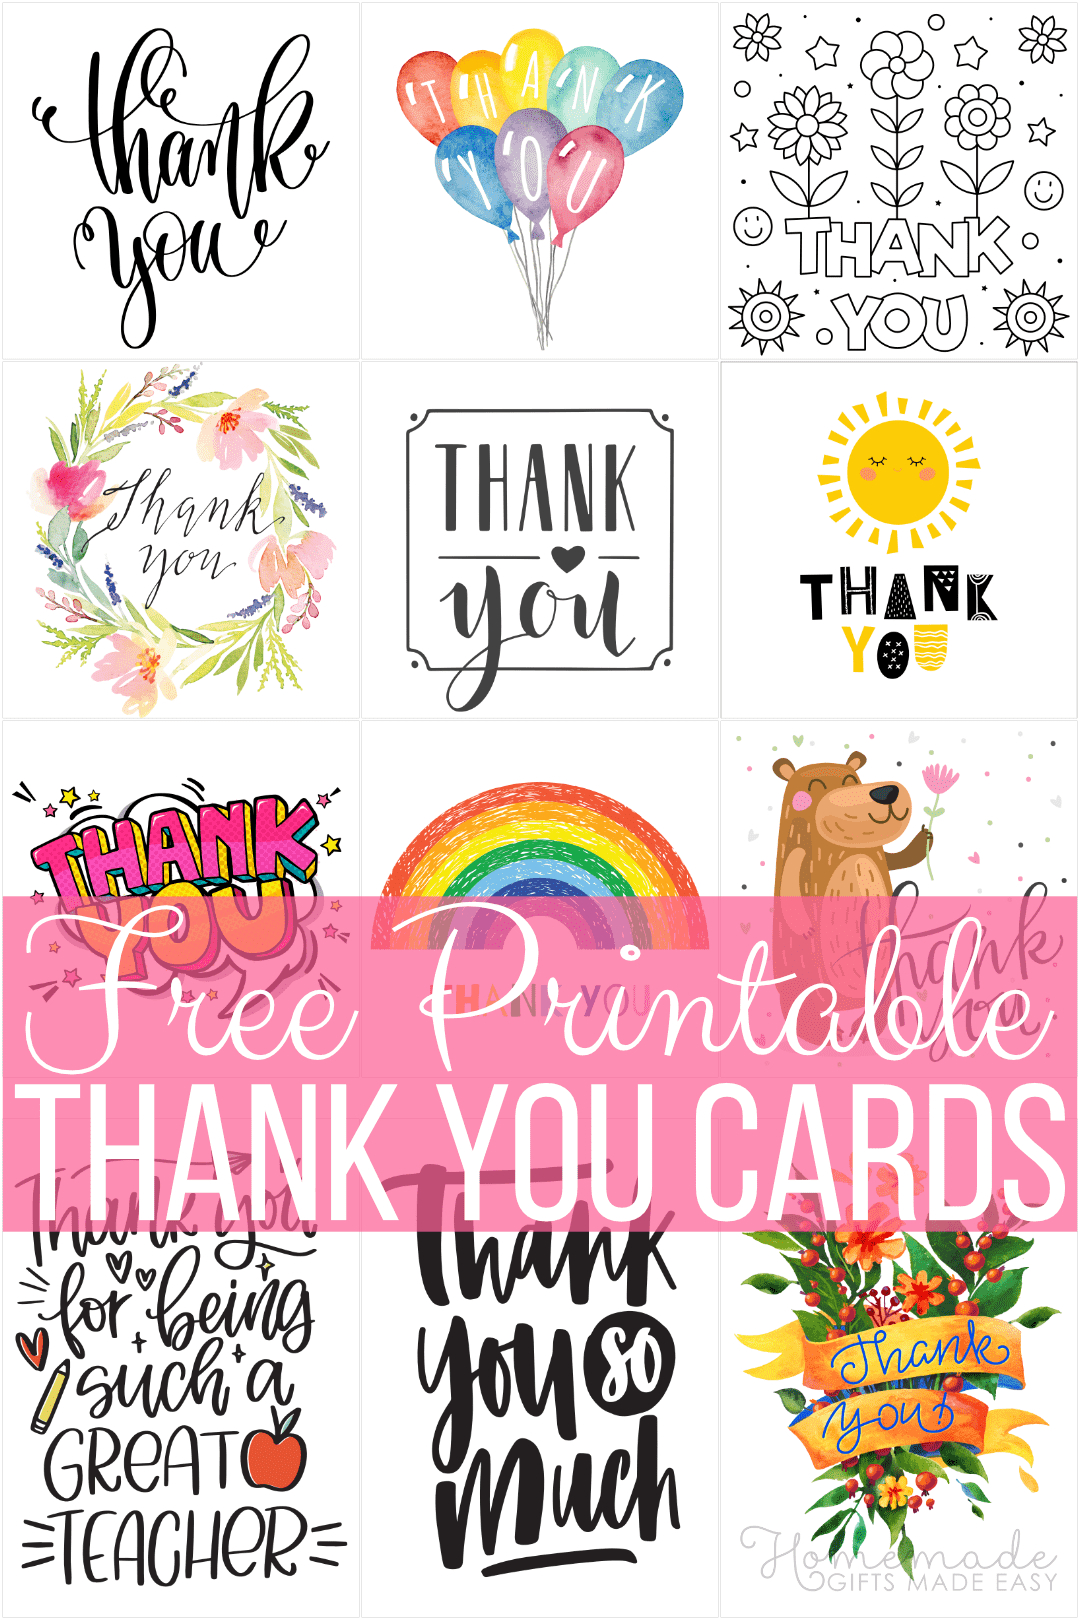 Free Printable Thank You Cards intended for Free Printable Thank You Cards For Teachers